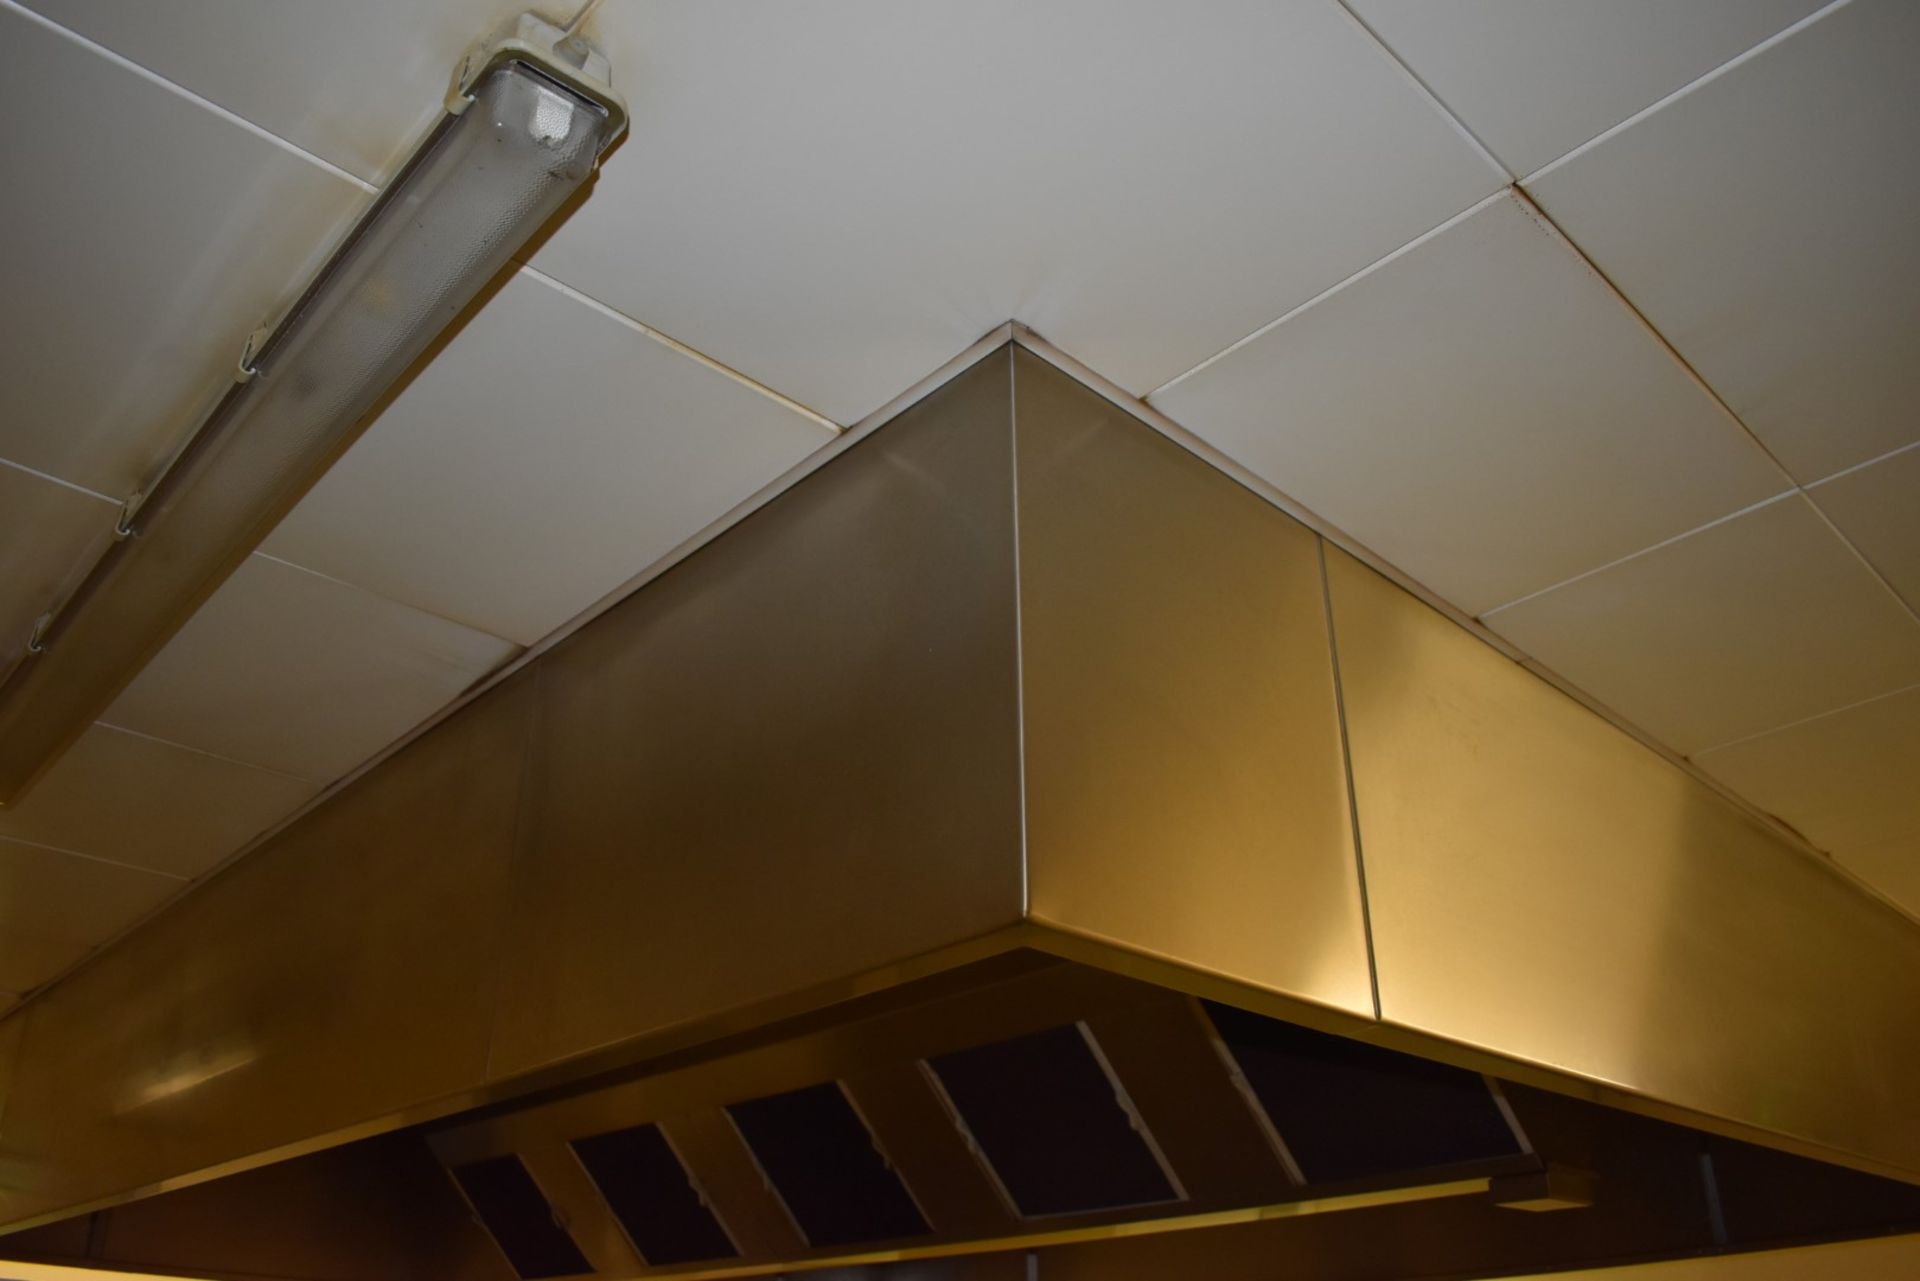 1 x Commerical Kitchen Ceiling Mounted Extractor Hood - Stainless Steel - Breaks into Multiple Parts - Image 6 of 17